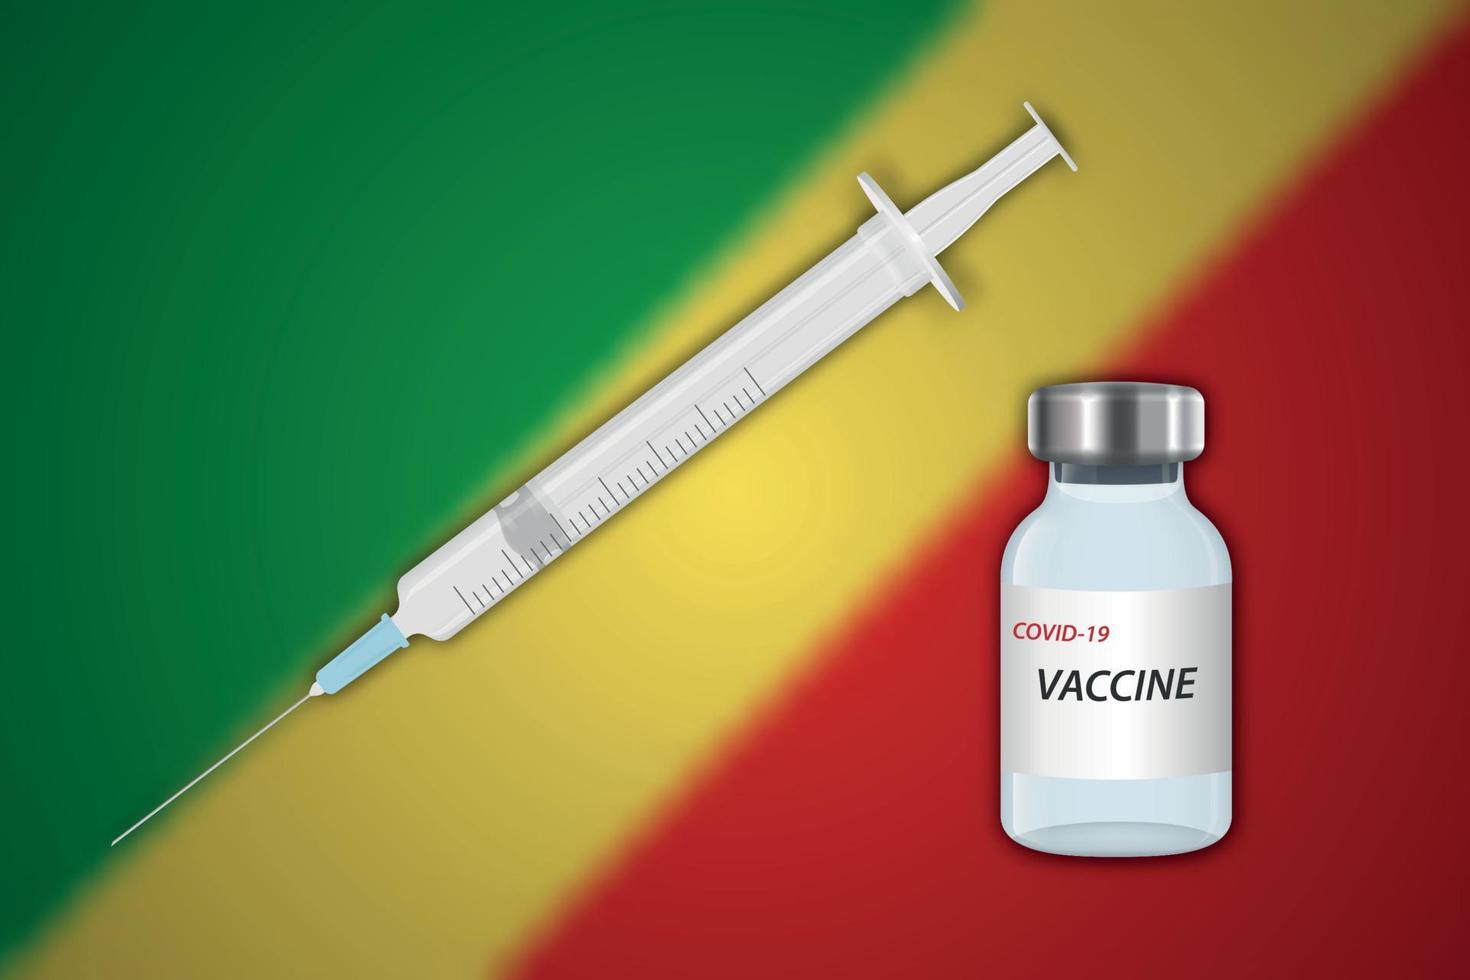 Syringe and vaccine vial on blur background with Congo flag, vector